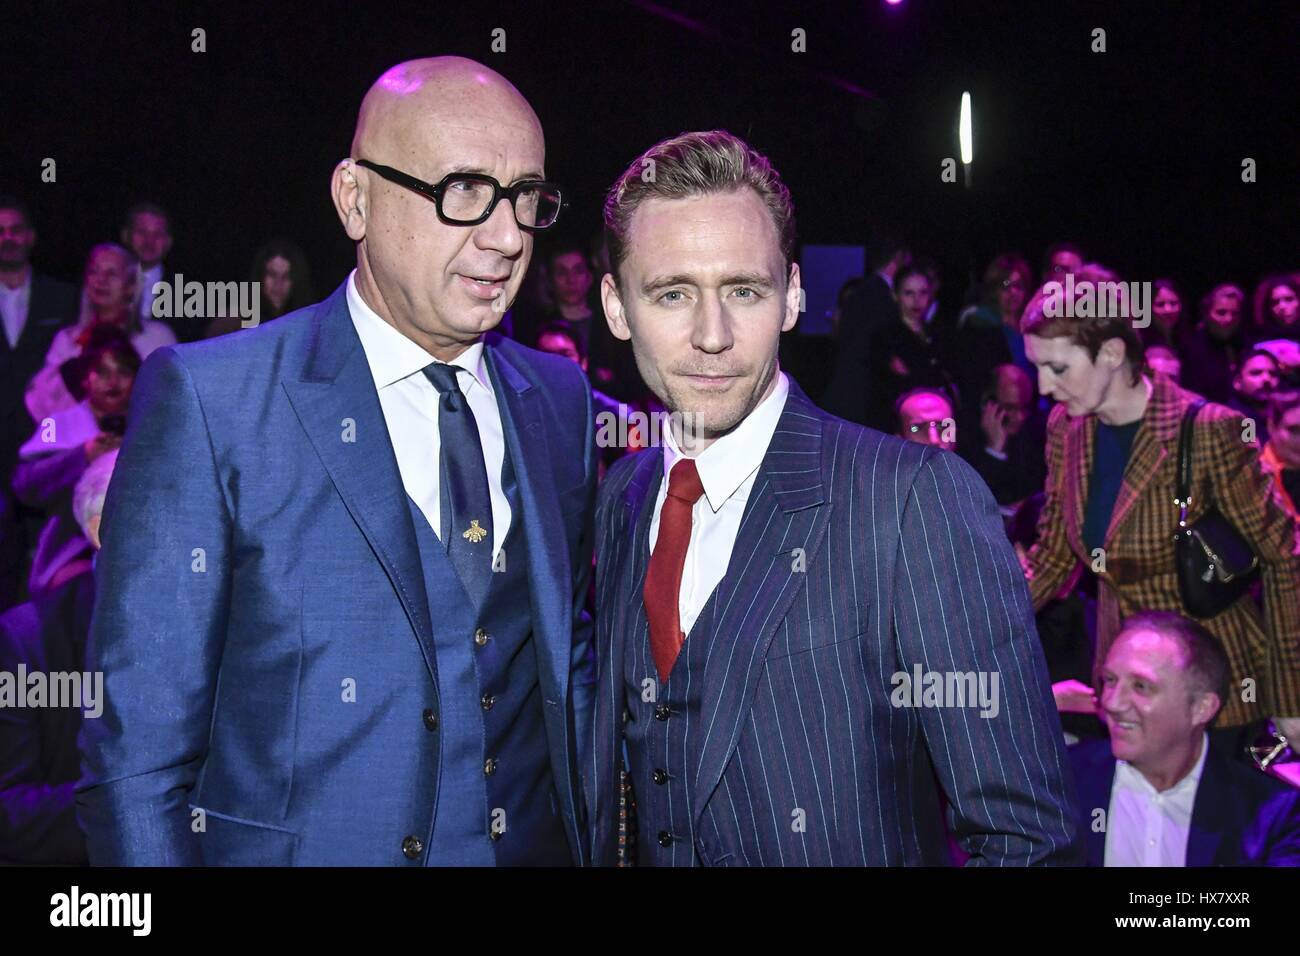 Milan Fashion Week - Gucci - Front Row Featuring: Marco Bizzarri, Tom  Hiddleston Where: Milan, Italy When: 22 Feb 2017 Credit: IPA/WENN.com  **Only available for publication in UK, USA, Germany, Austria, Switzerland**